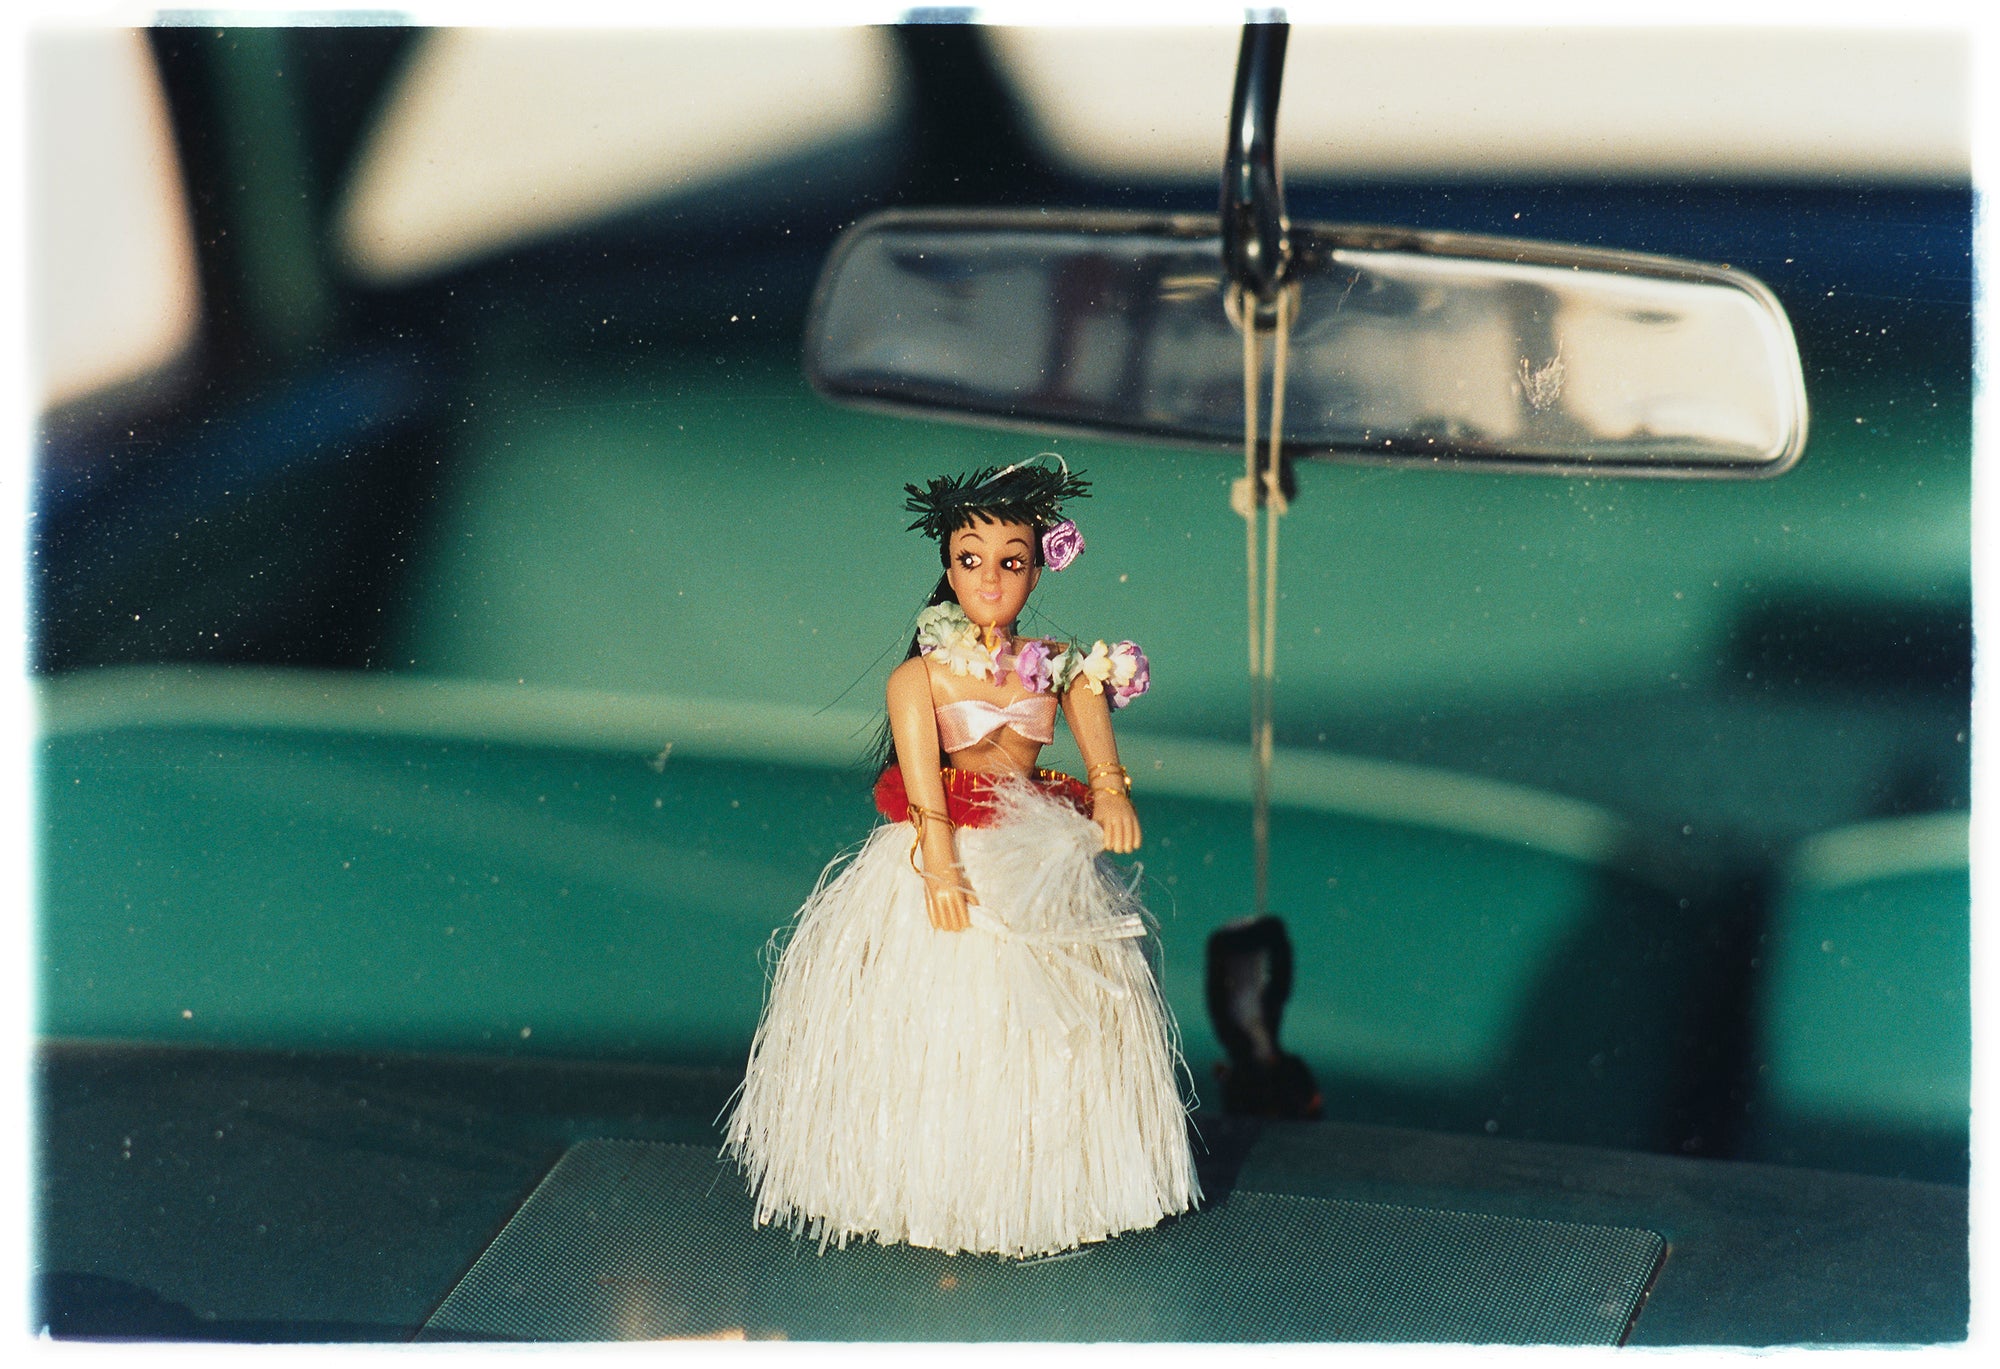 Photograph by Richard Heeps.  A hula doll sits on a dashboard, below the rear view mirror.  The car's interior is green and out of focus.